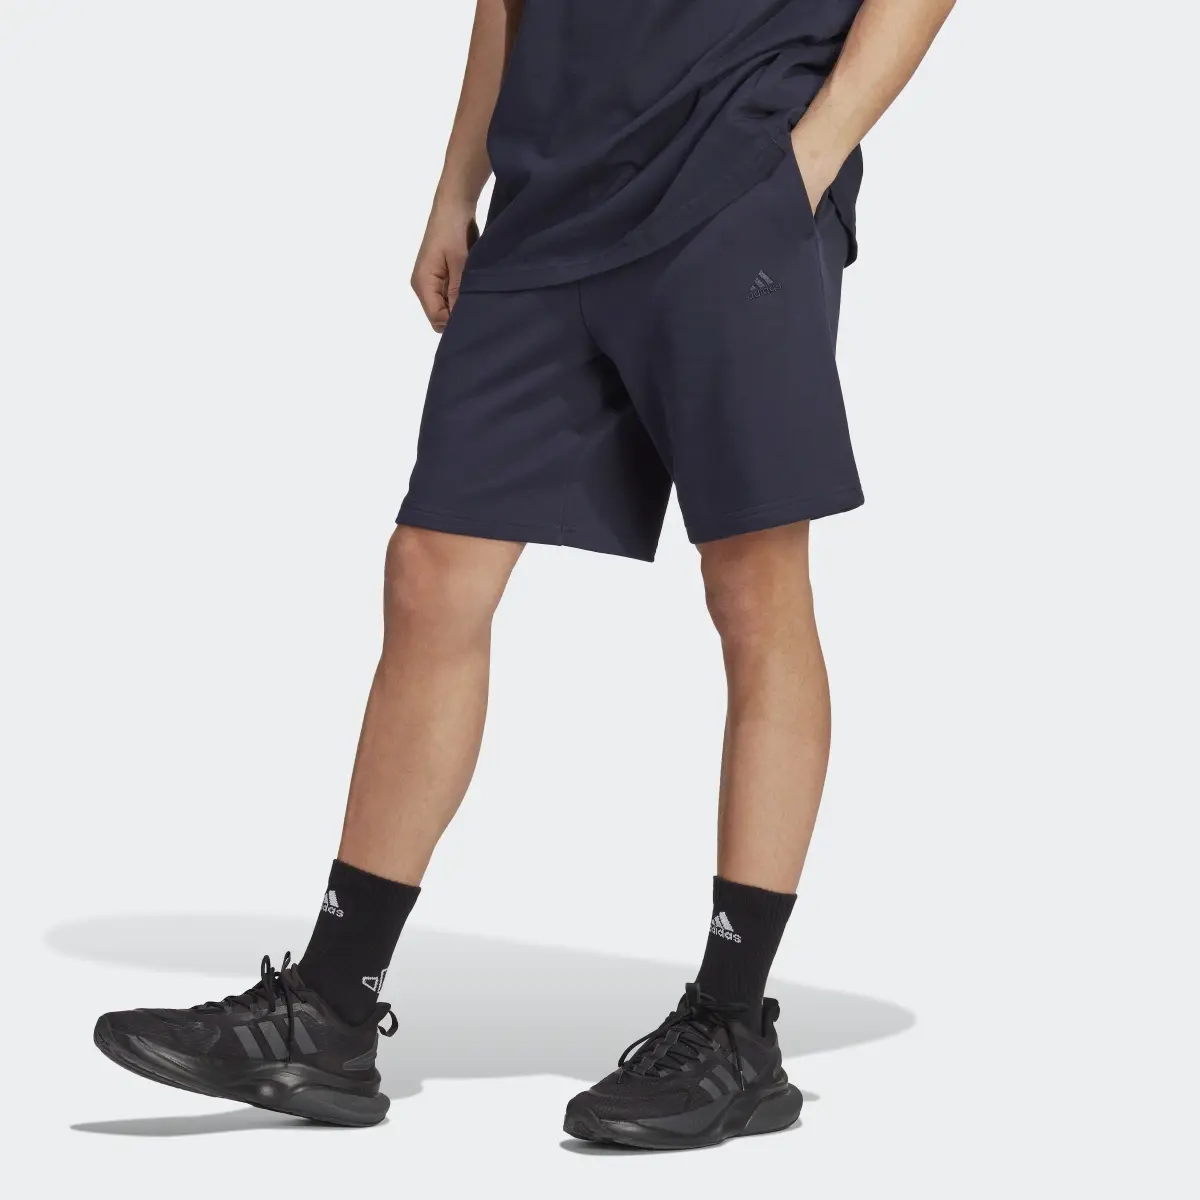 Adidas ALL SZN French Terry Shorts. 1